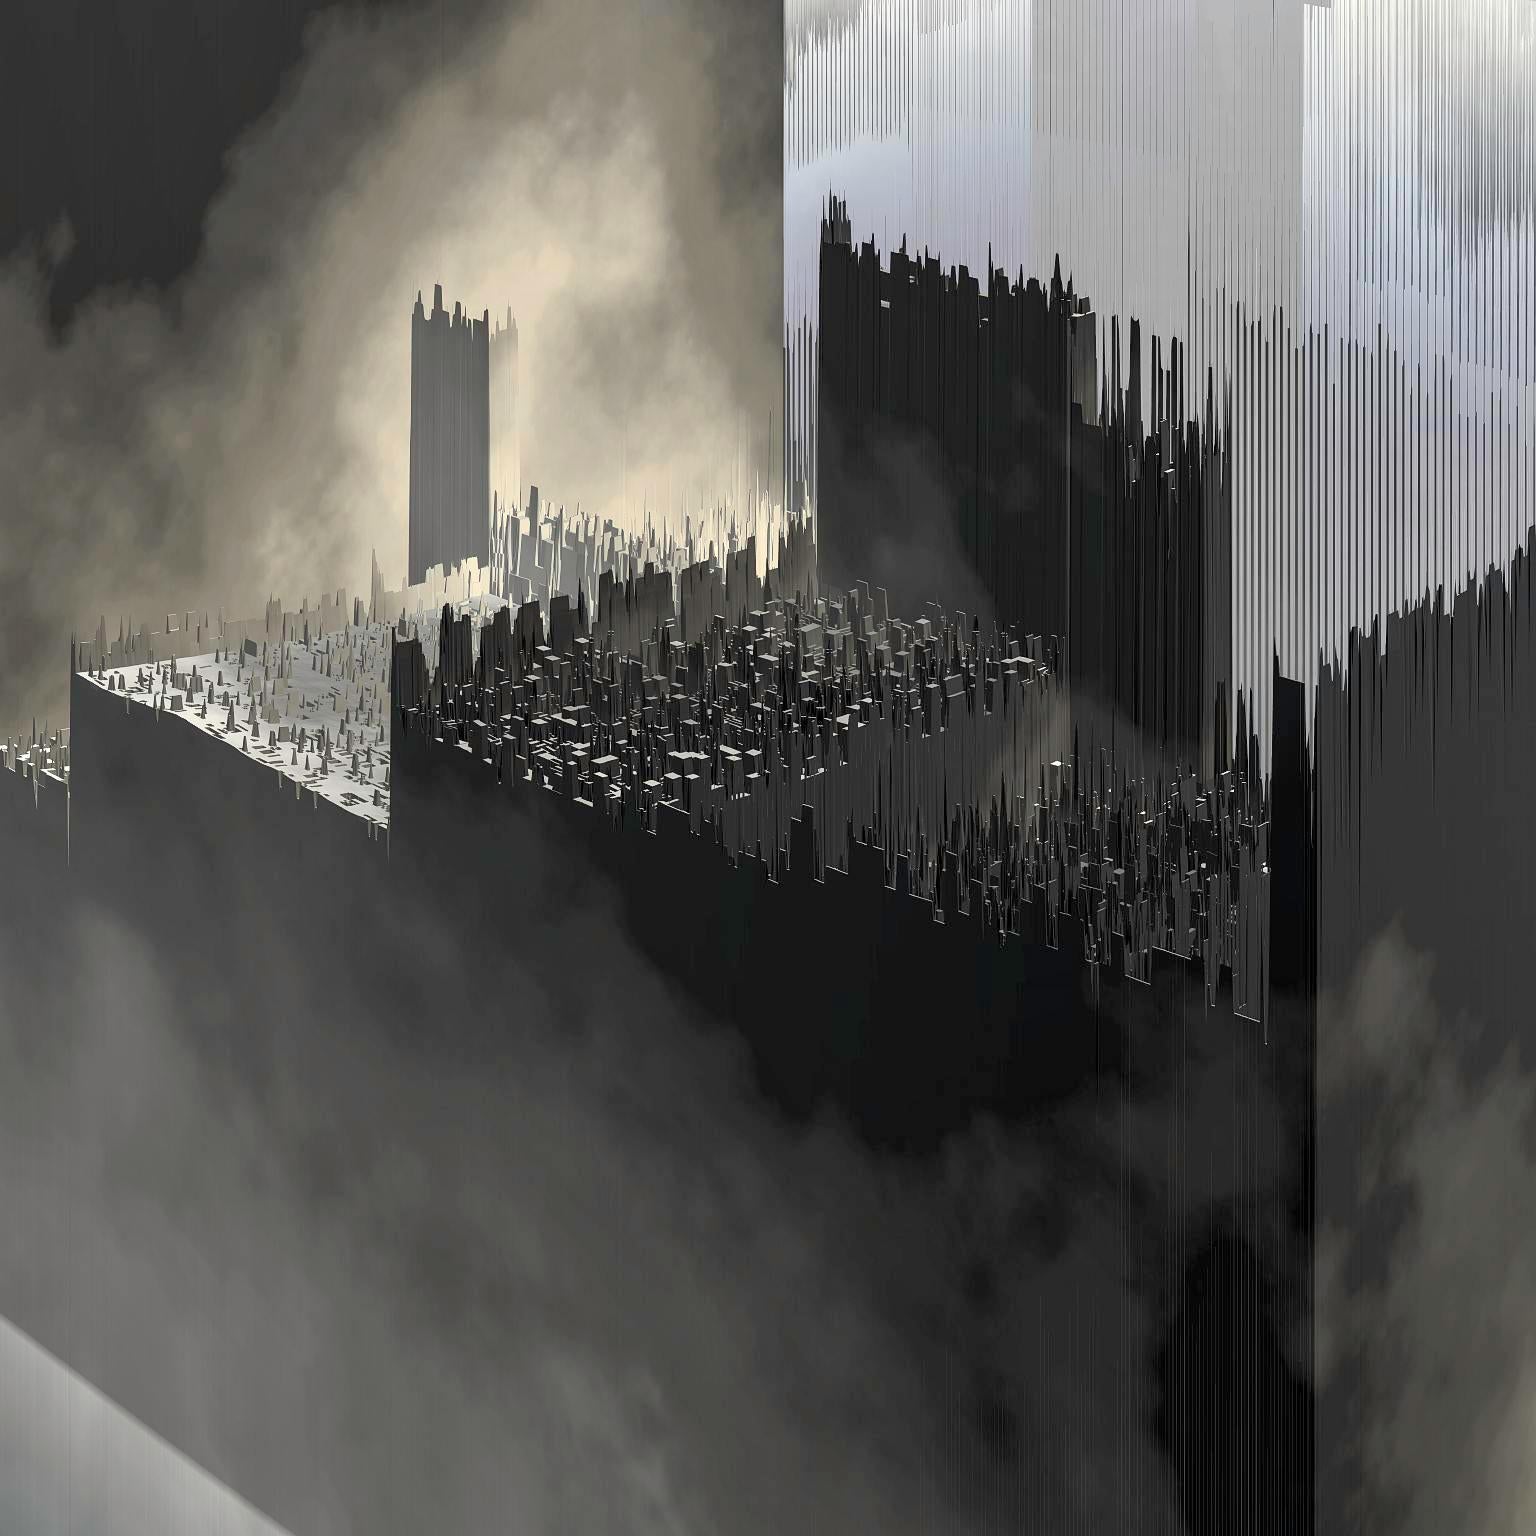 City Landcuts Assemblage - Vision of a Urban Territory - Abstract Cityscapes - Gray Landscape Photograph by Paul-Émile Rioux